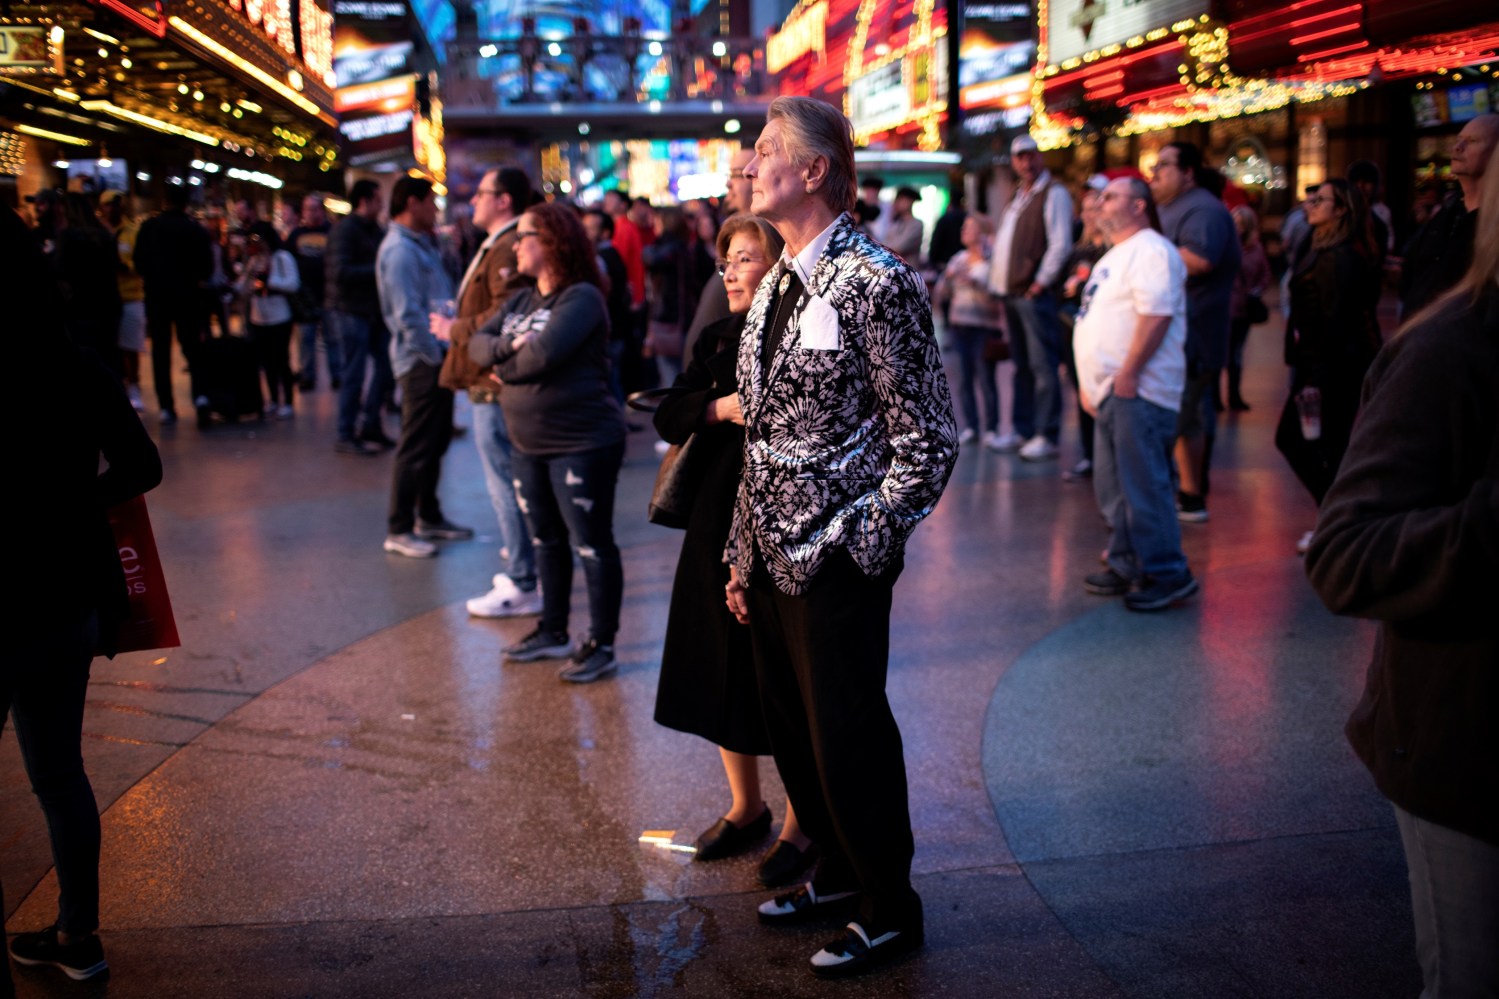 A couple watches street performers in downtown in Las Vegas, Nevada, U.S., February 20, 2020. Picture taken February 20, 2020. REUTERS/Mike Segar